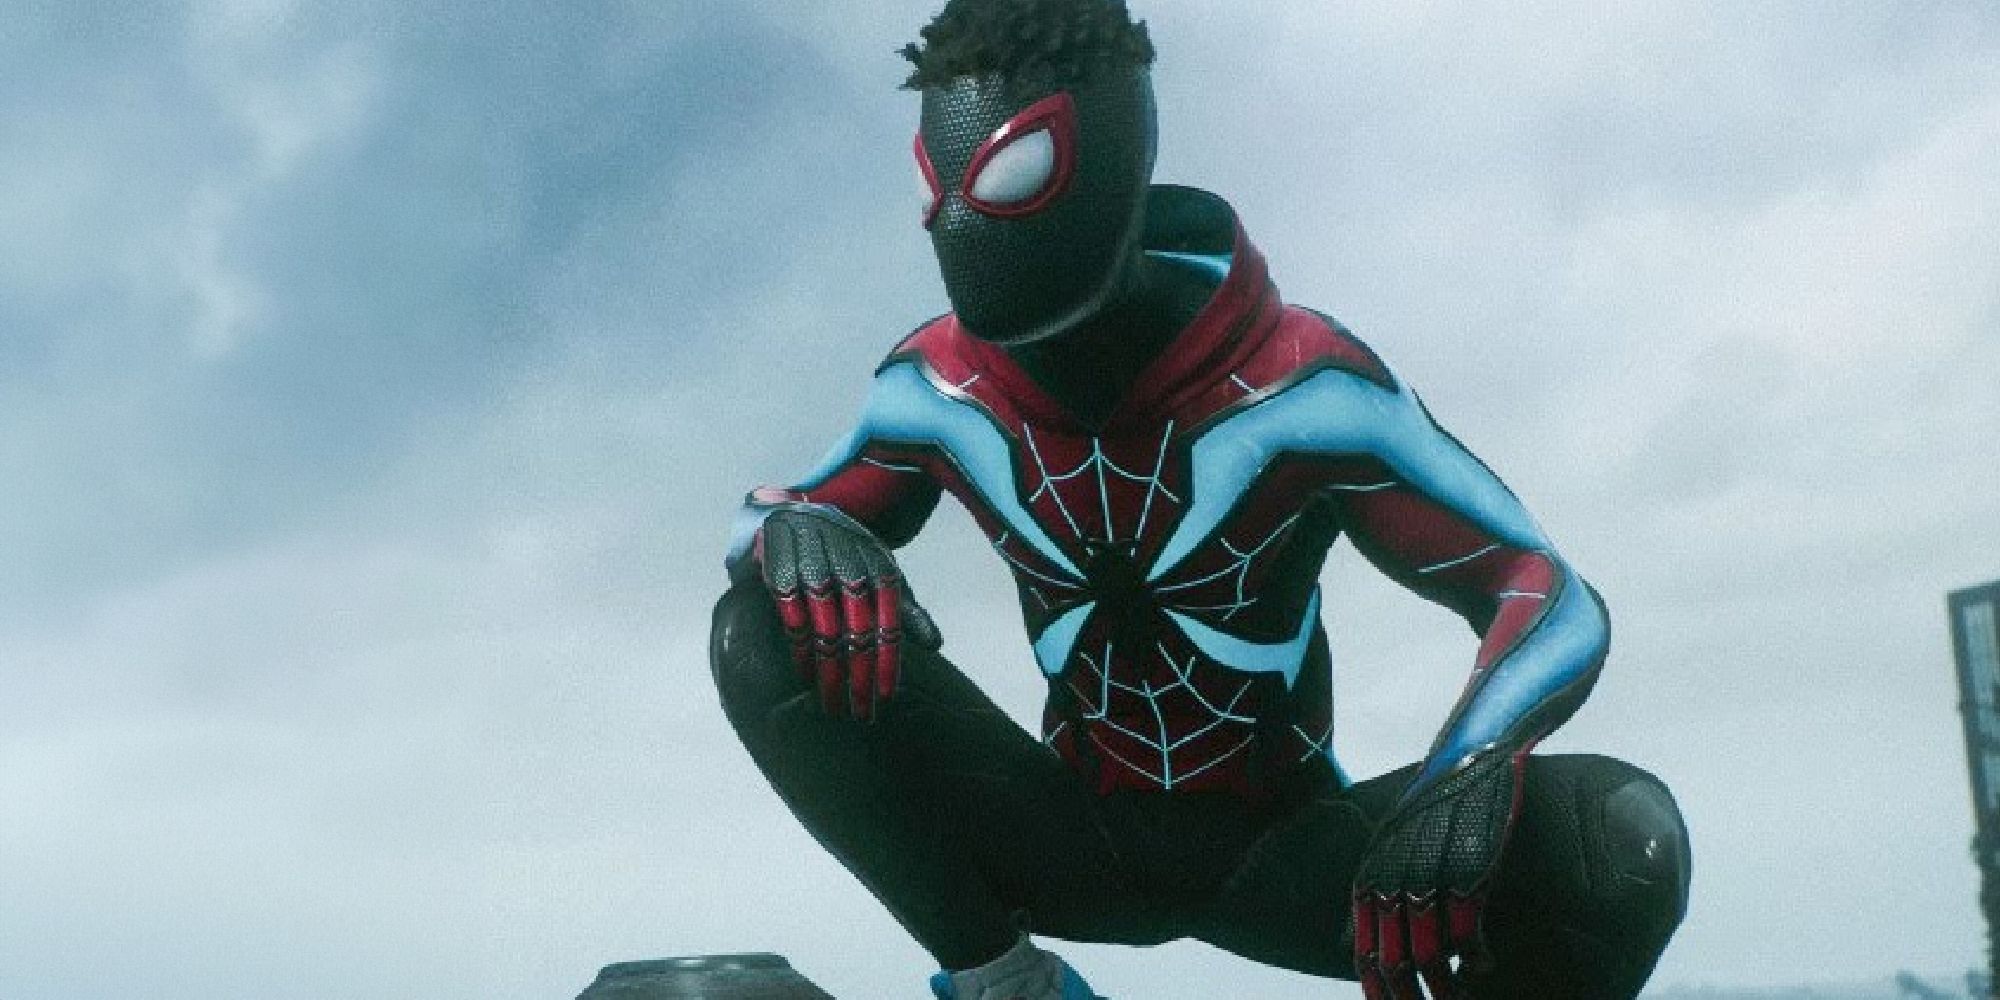 That Awful Spider-Man 2 Suit Wasn't Designed By Adidas